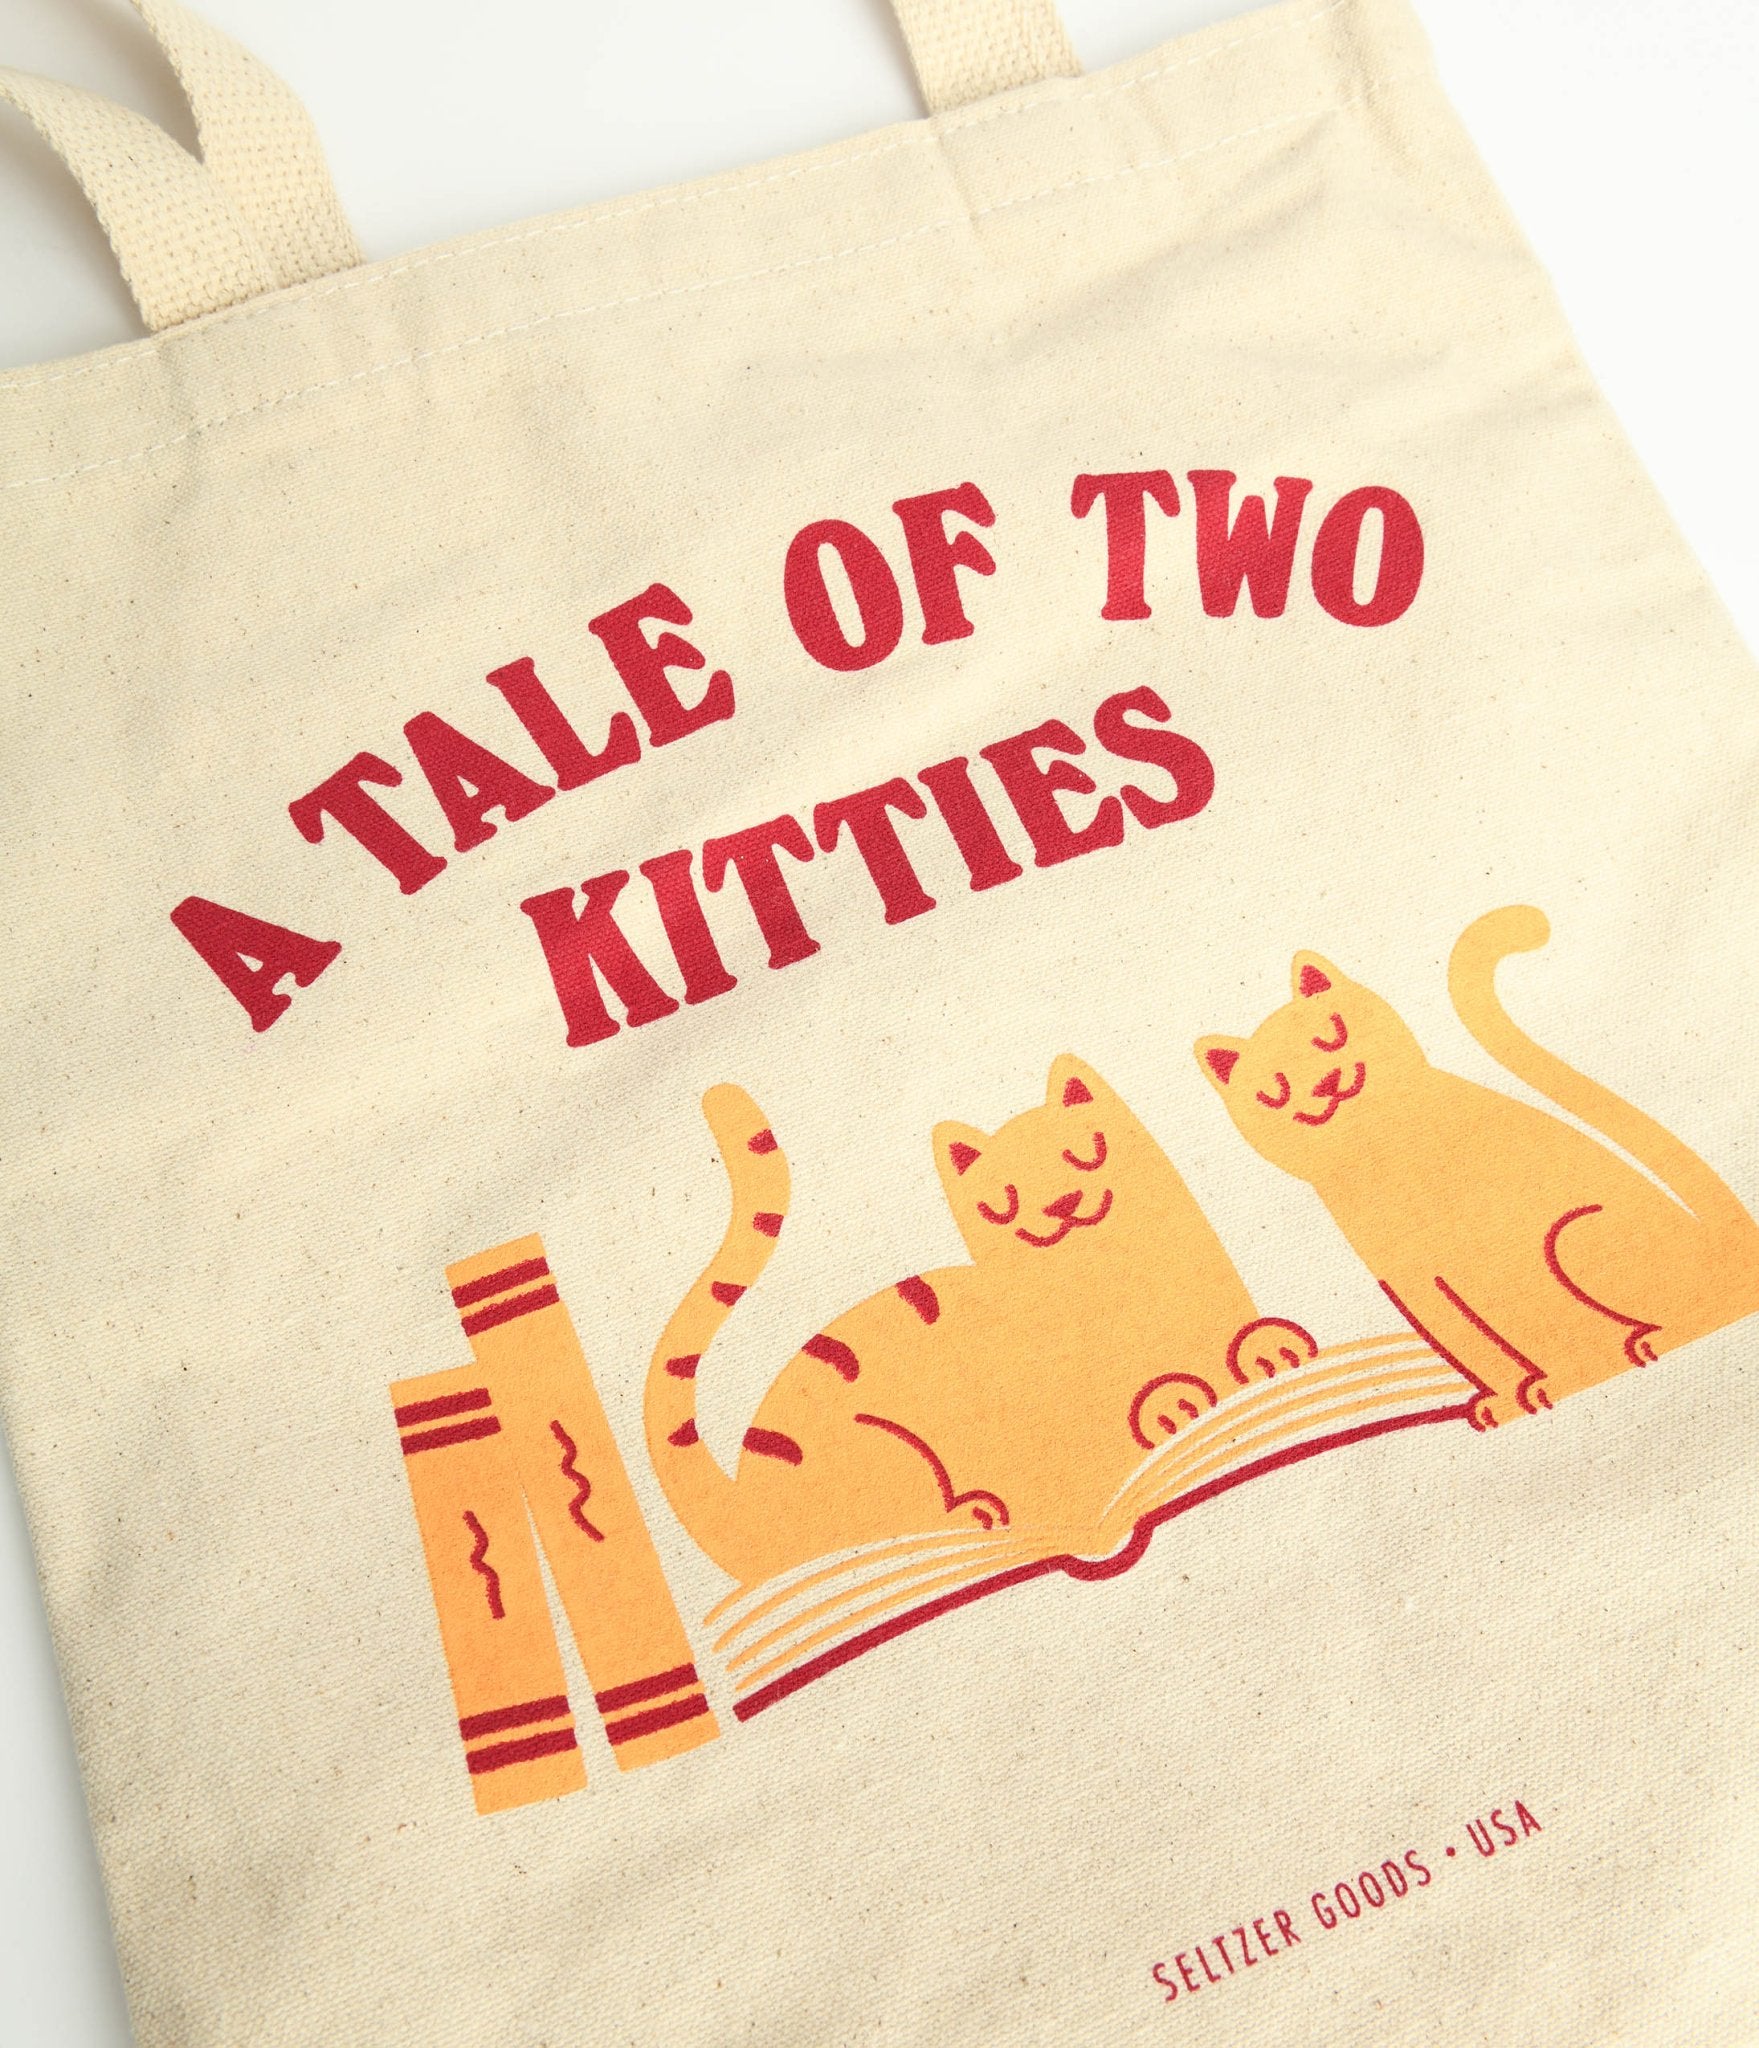 https://cdn.shopify.com/s/files/1/2714/9310/products/tale-of-two-kitties-canvas-tote-bag-780953.jpg?v=1703098195